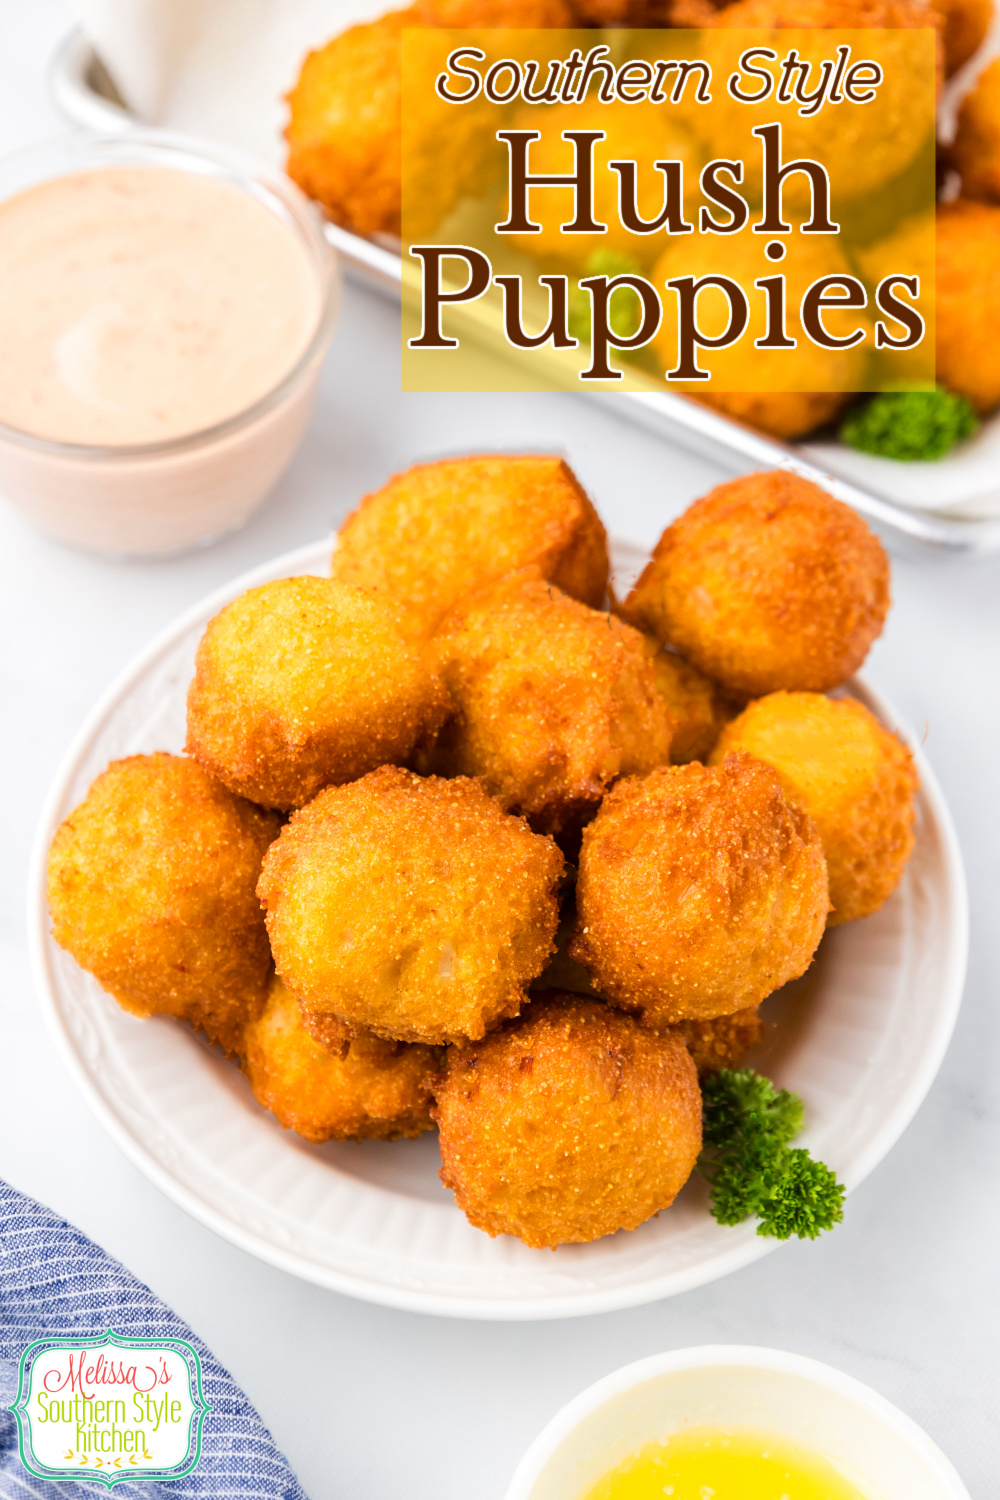 This homemade Hush Puppies recipe results in crispy fried cornbread fritters that are impossible to resist. #hushpuppies #friedhushpuppies #easyhushpuppyrecipe #southernstyle #seafoodrecipes #easysidedishrecipes #cornbread via @melissasssk